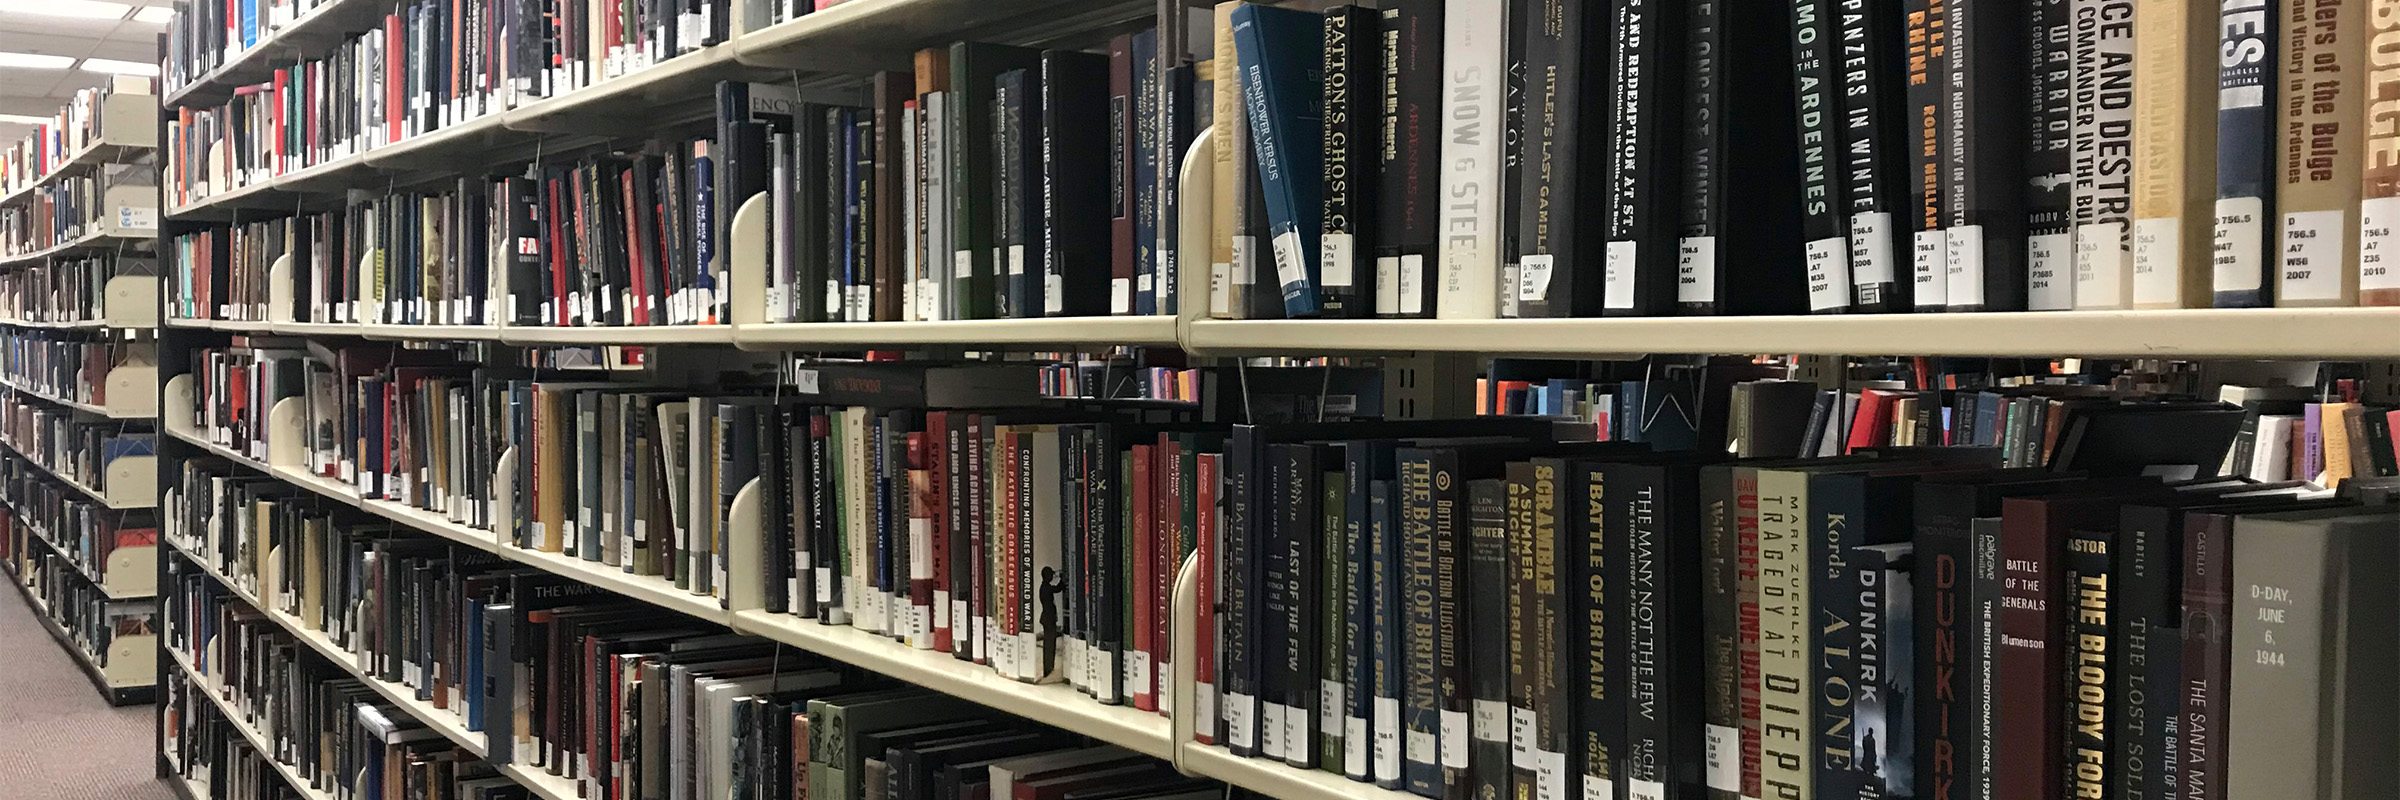 A picture of the first floor stacks from James Branch Cabell library.